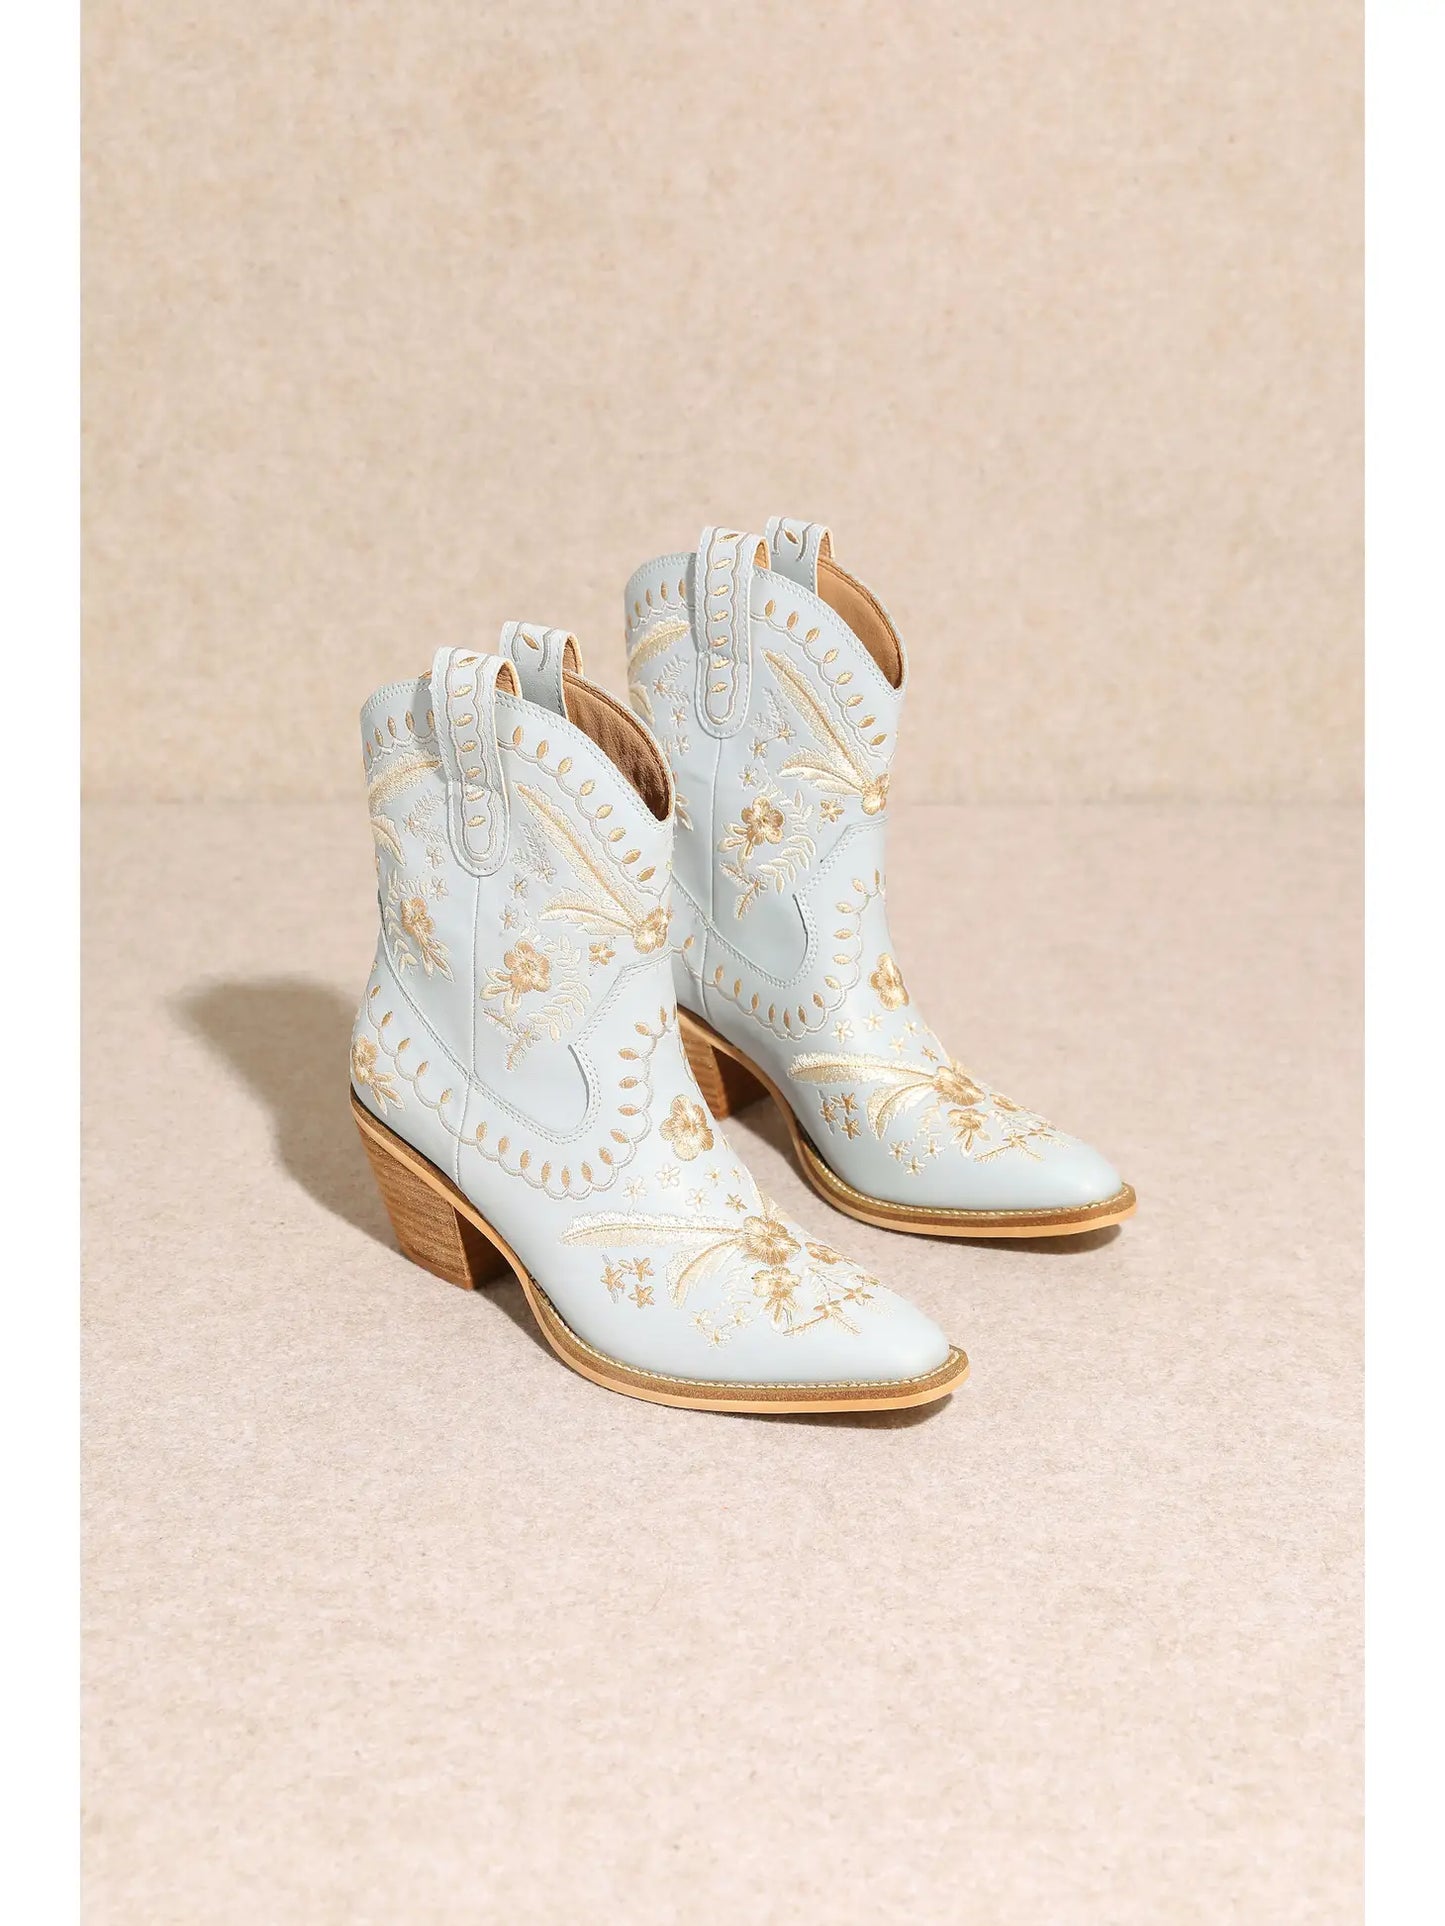 Embroidered Half Cowboy Boot